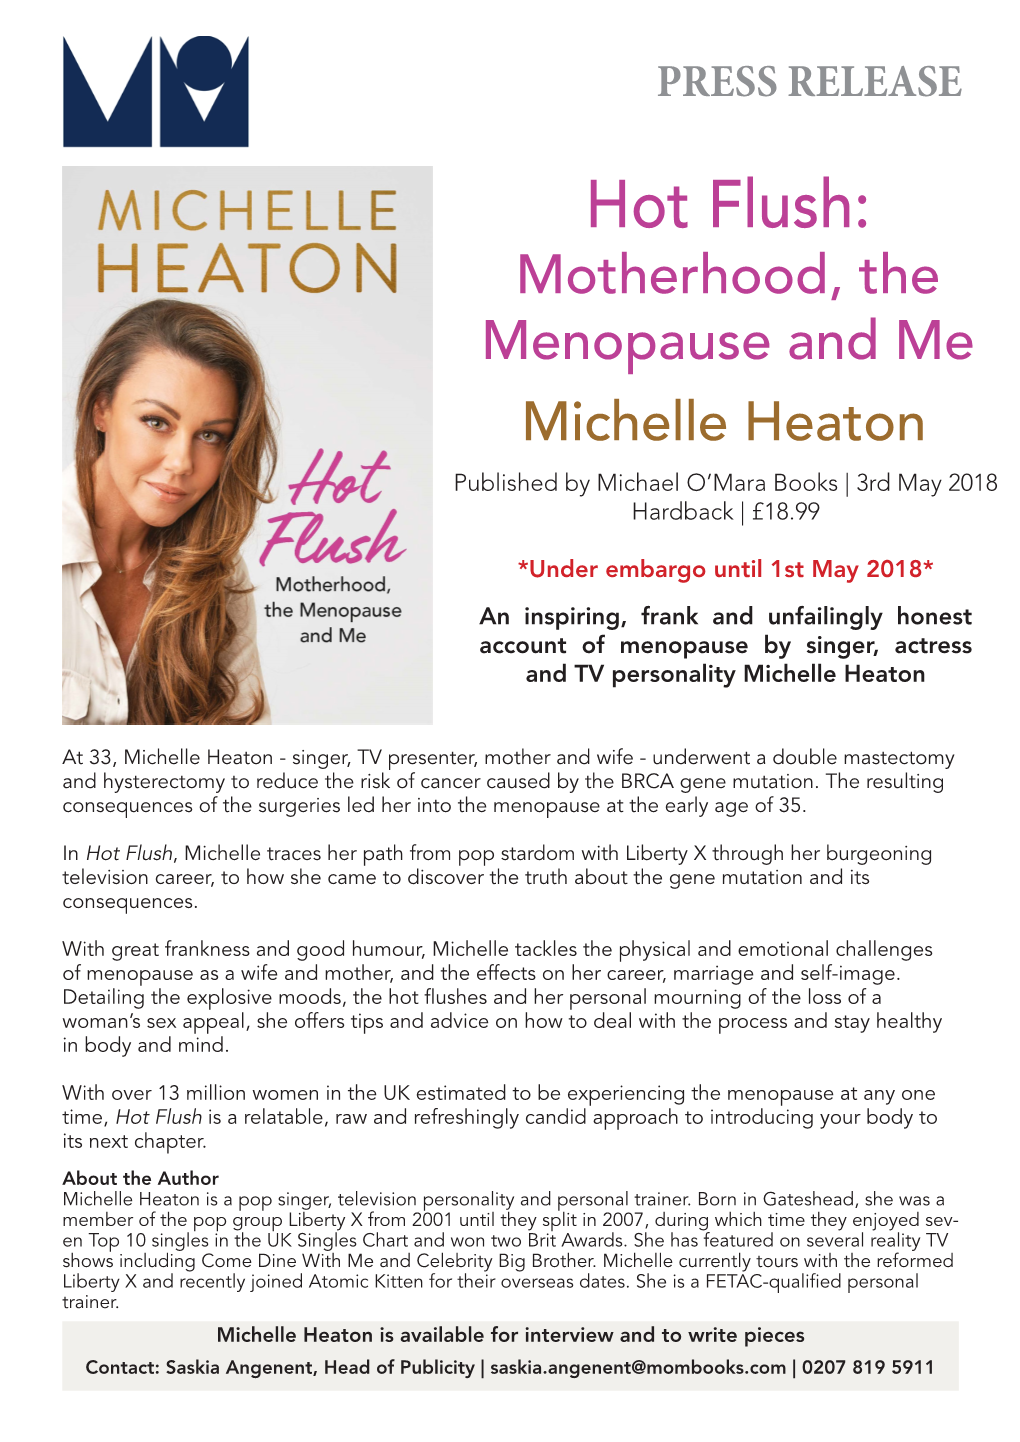 Hot Flush: Motherhood, the Menopause and Me Michelle Heaton Published by Michael O’Mara Books | 3Rd May 2018 Hardback | £18.99